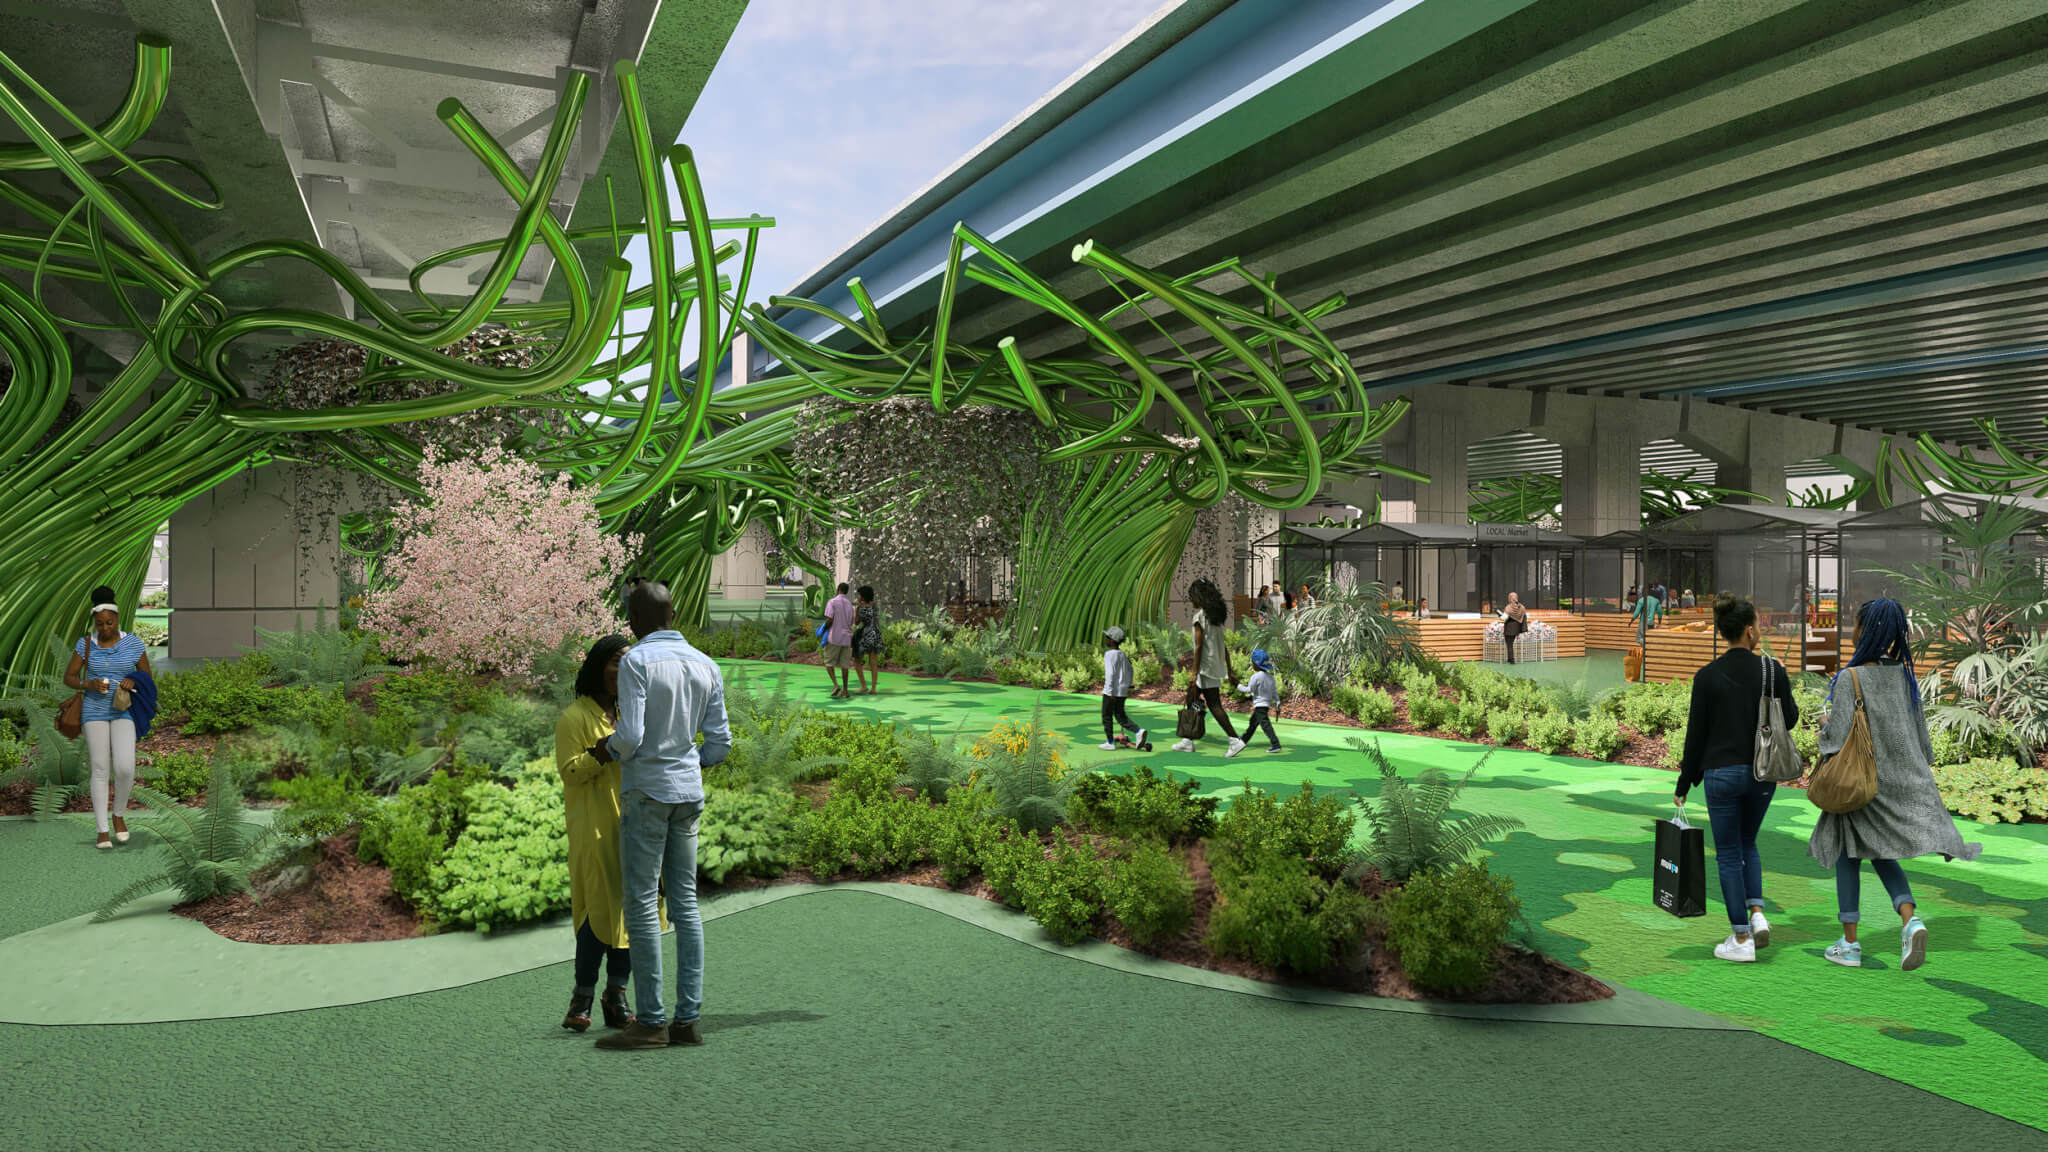 Rendering of a tree-like sculpture in a highway underpass with greenery surrounding it.